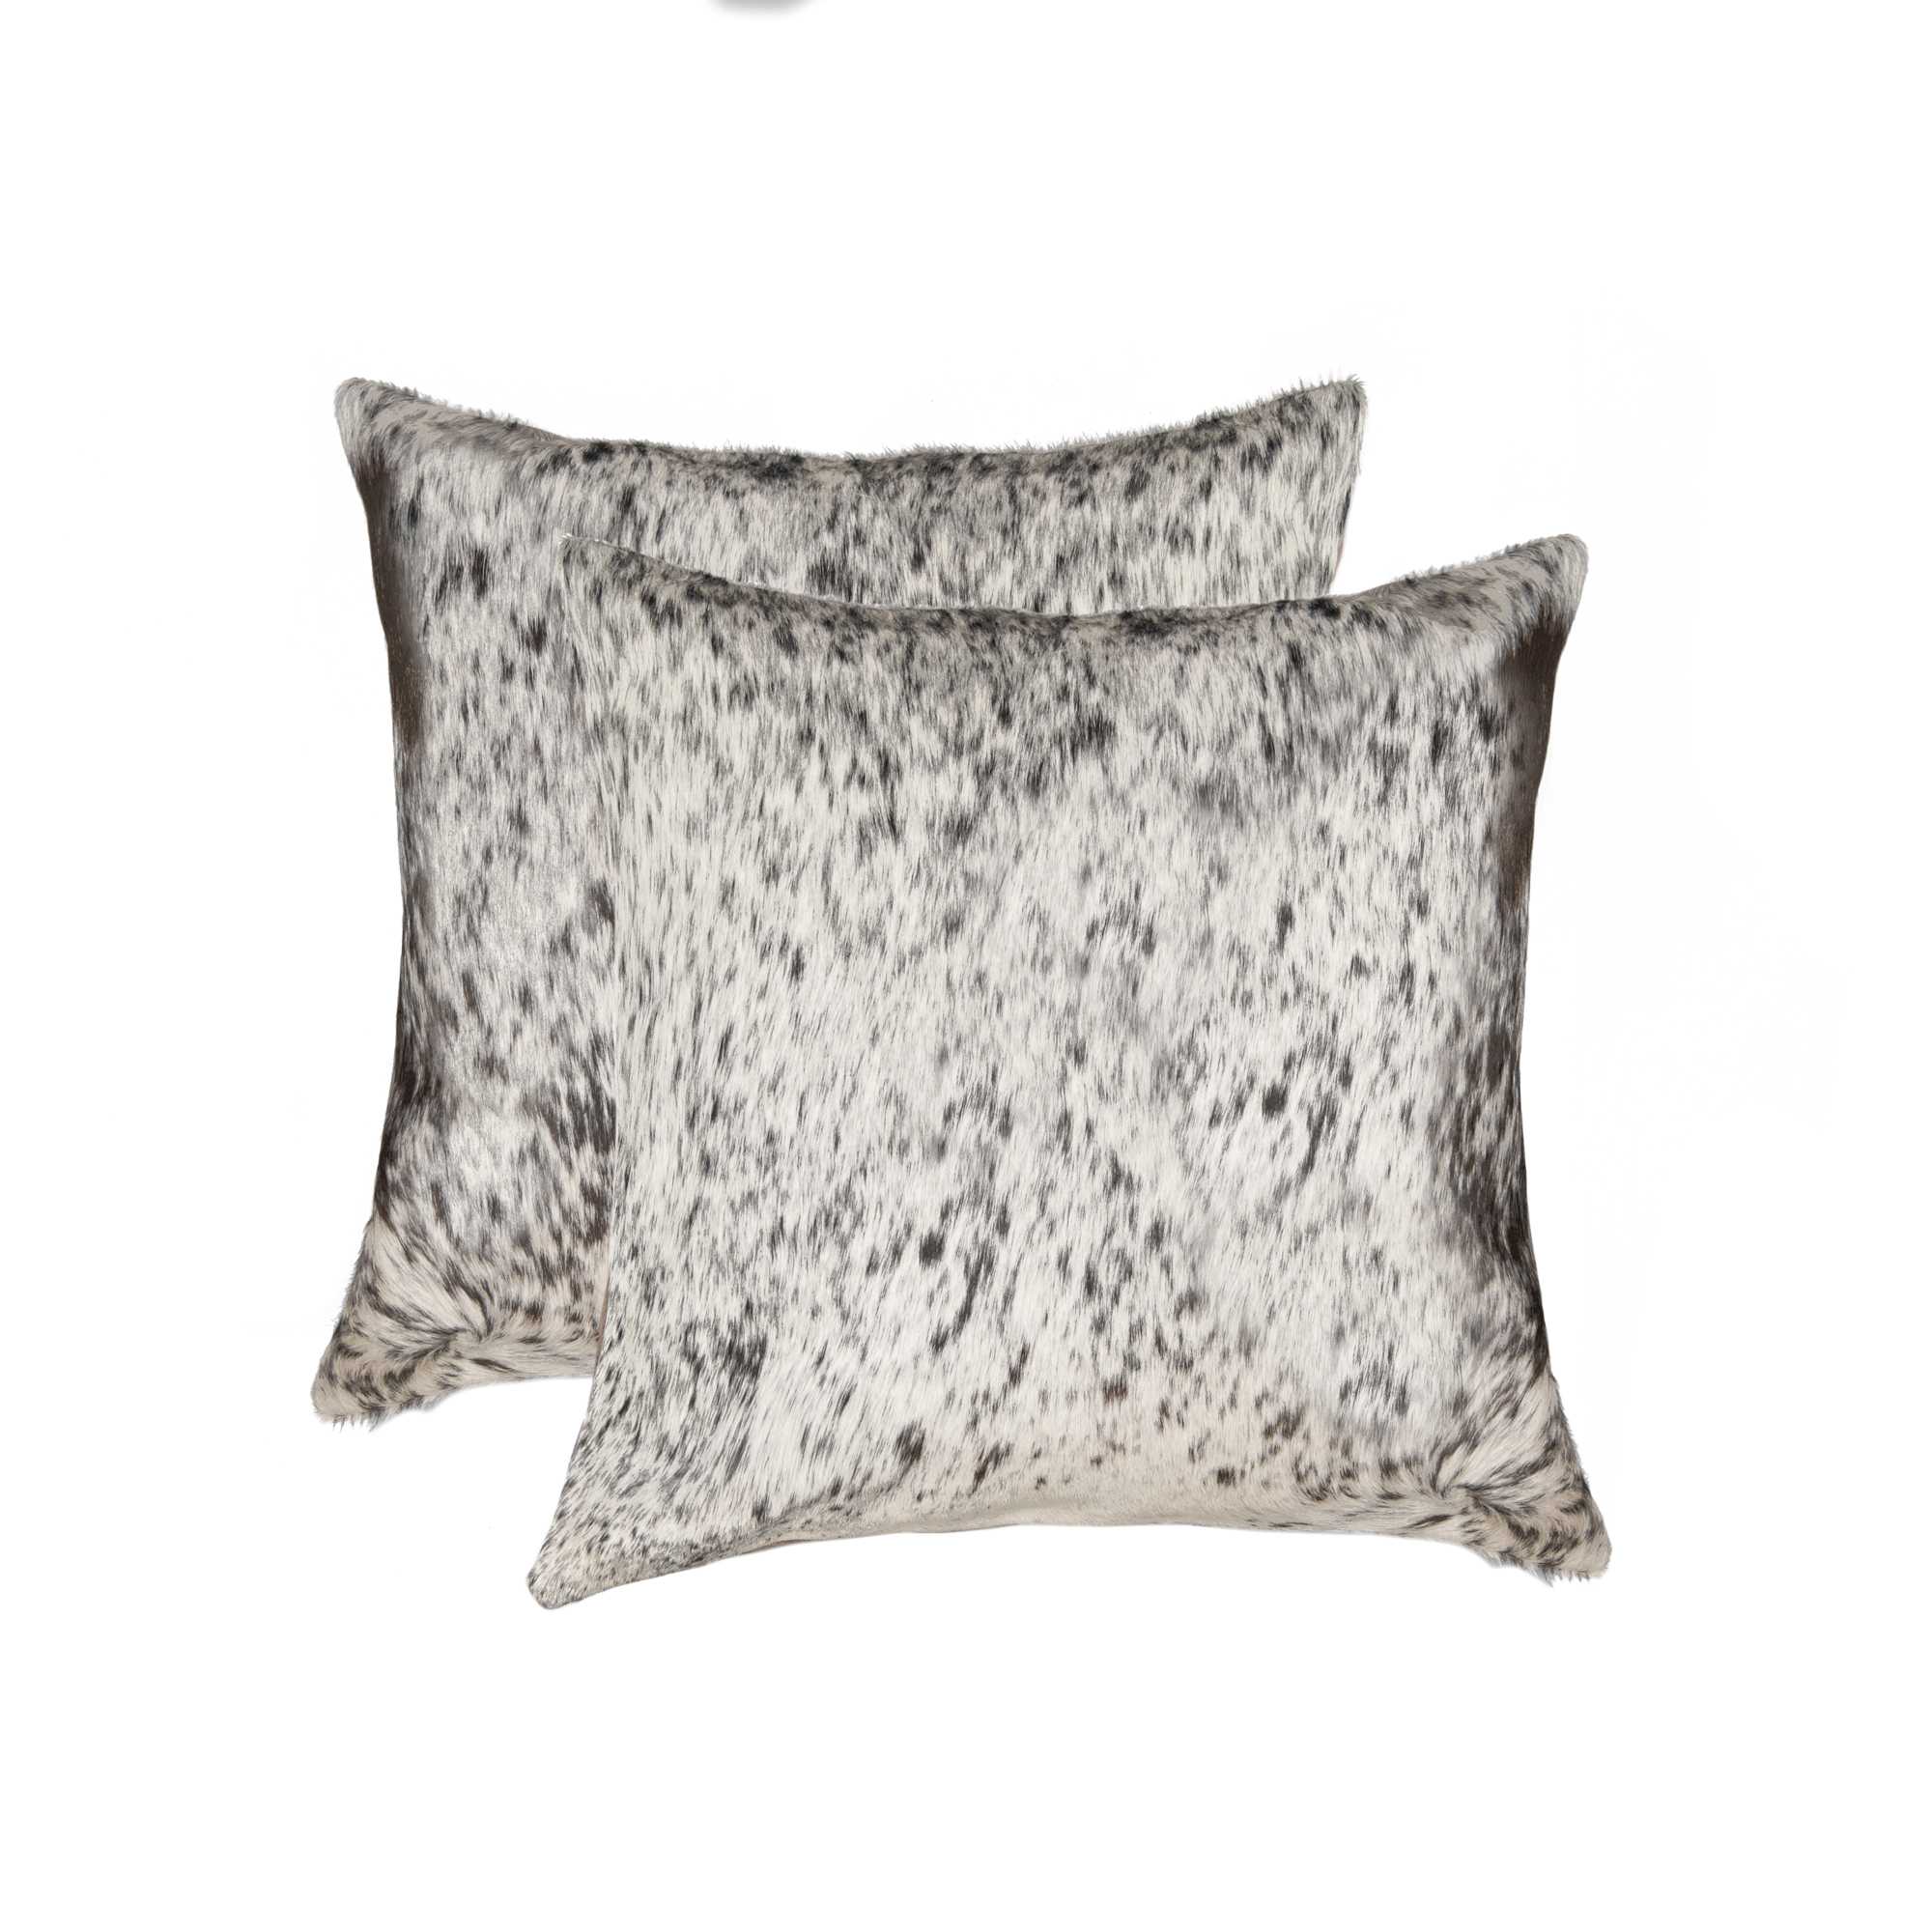 18" x 18" x 5" Salt And Pepper Gray And White Cowhide - Pillow 2-Pack